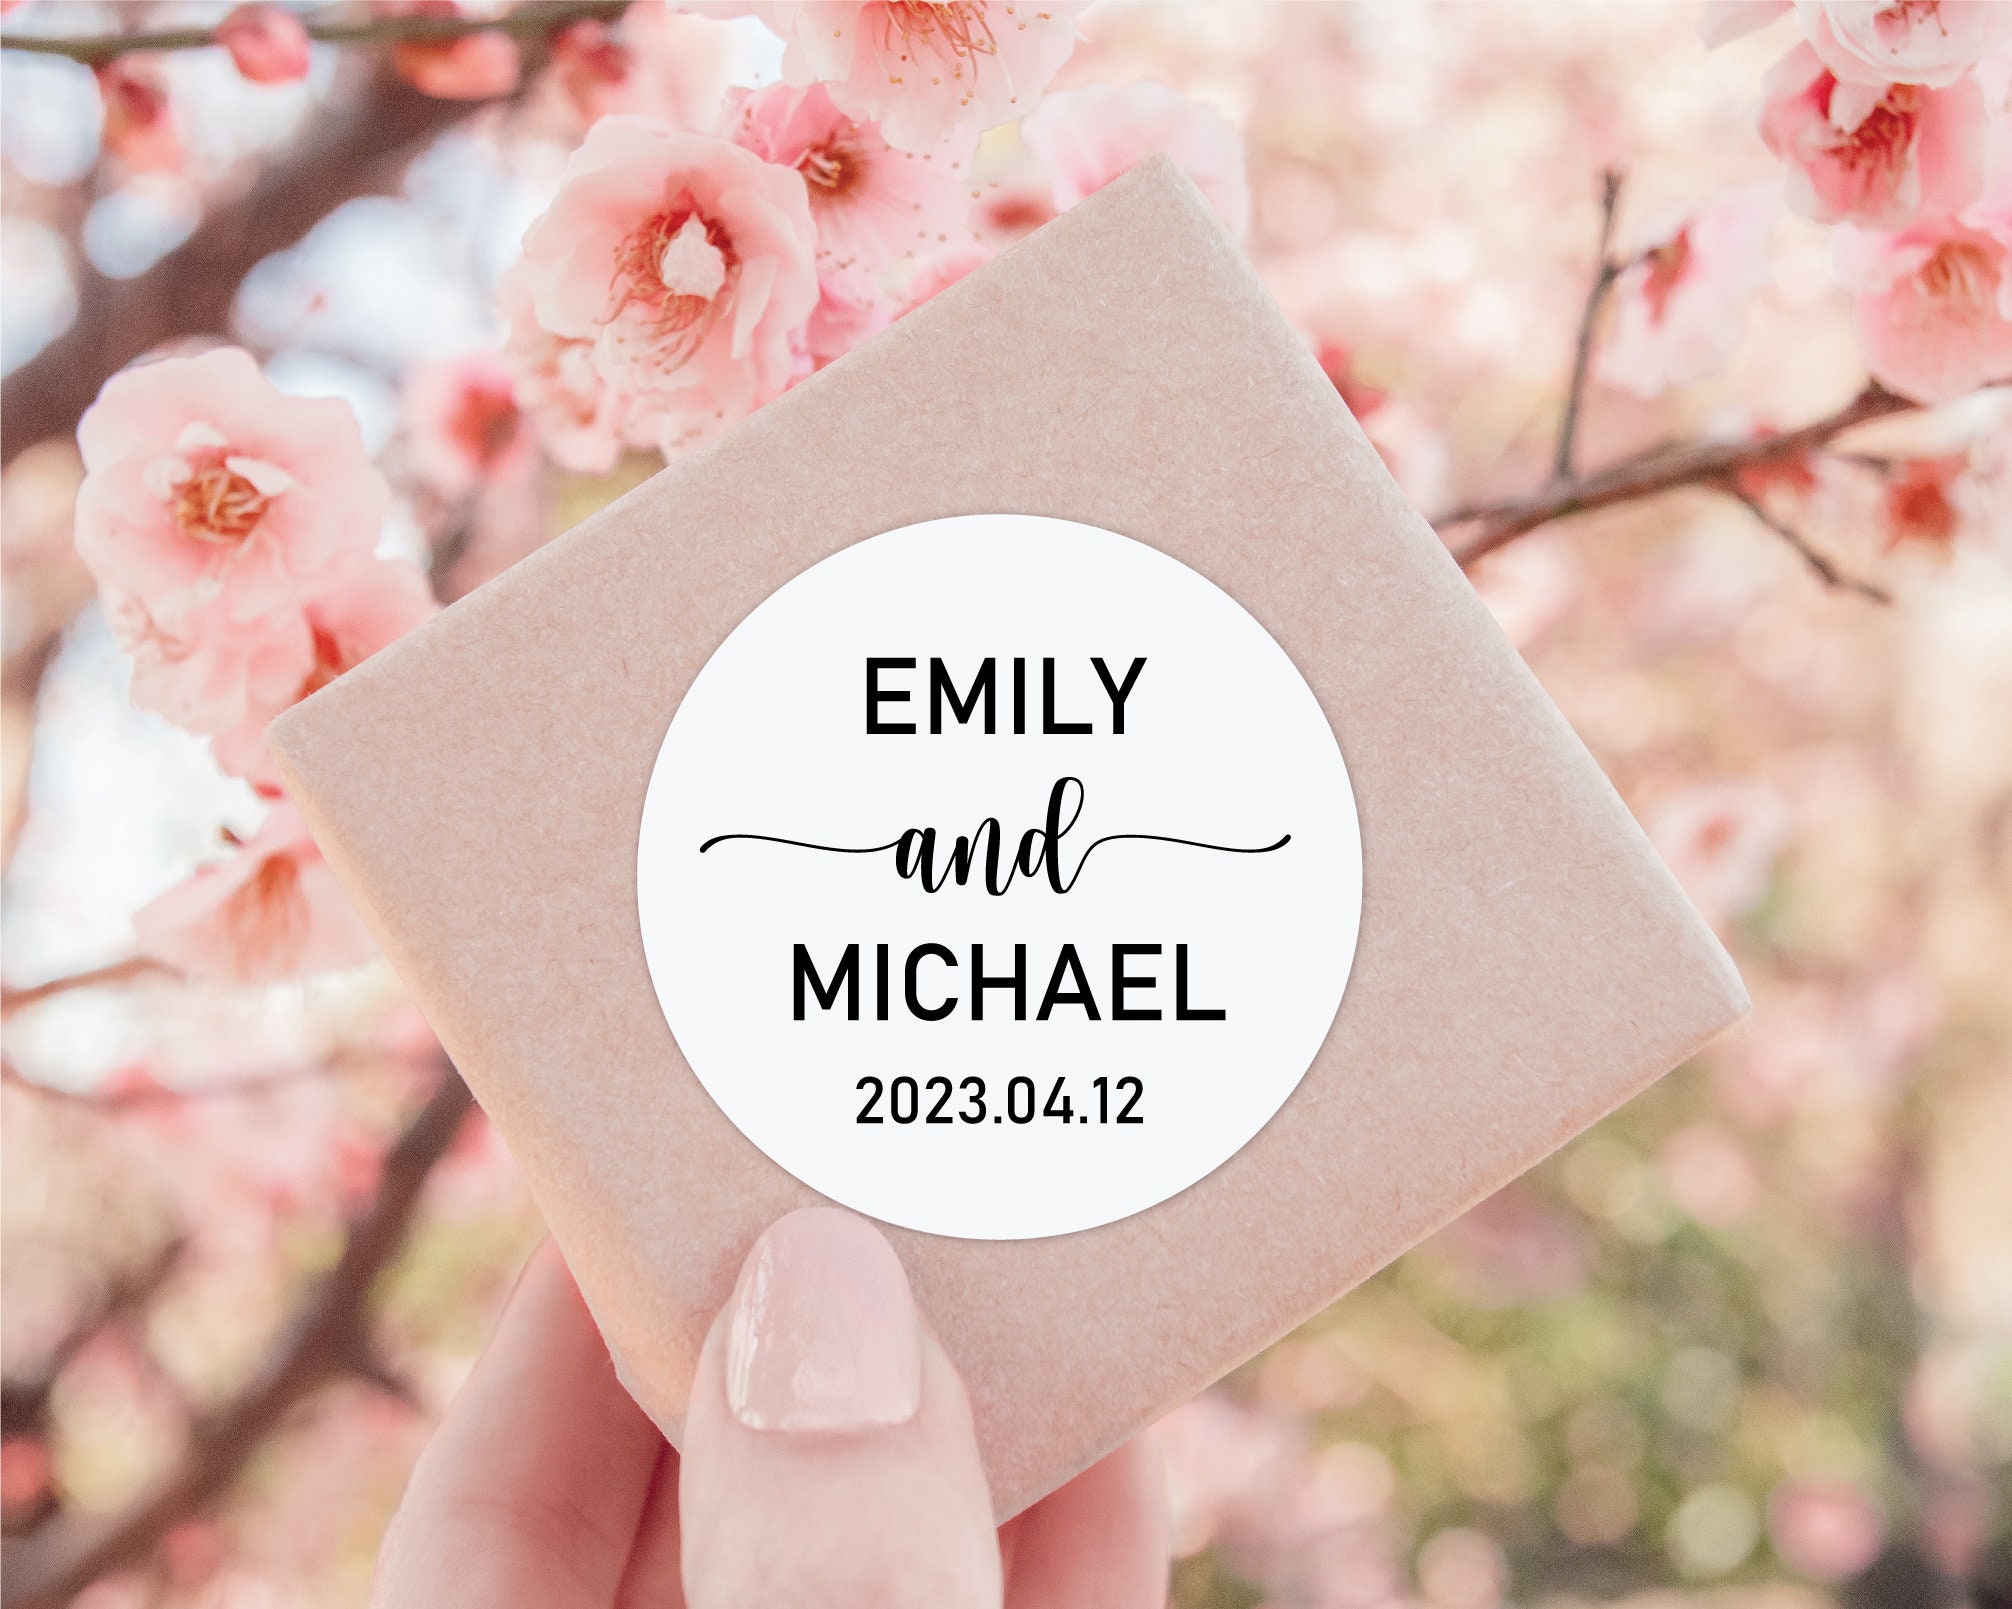 Customized Wedding Wedding Stickers Invitation Seals Personalized Label  Name Date Birthday Party Favors Gift Box Decoration Bag 220618 From Kua10,  $10.9